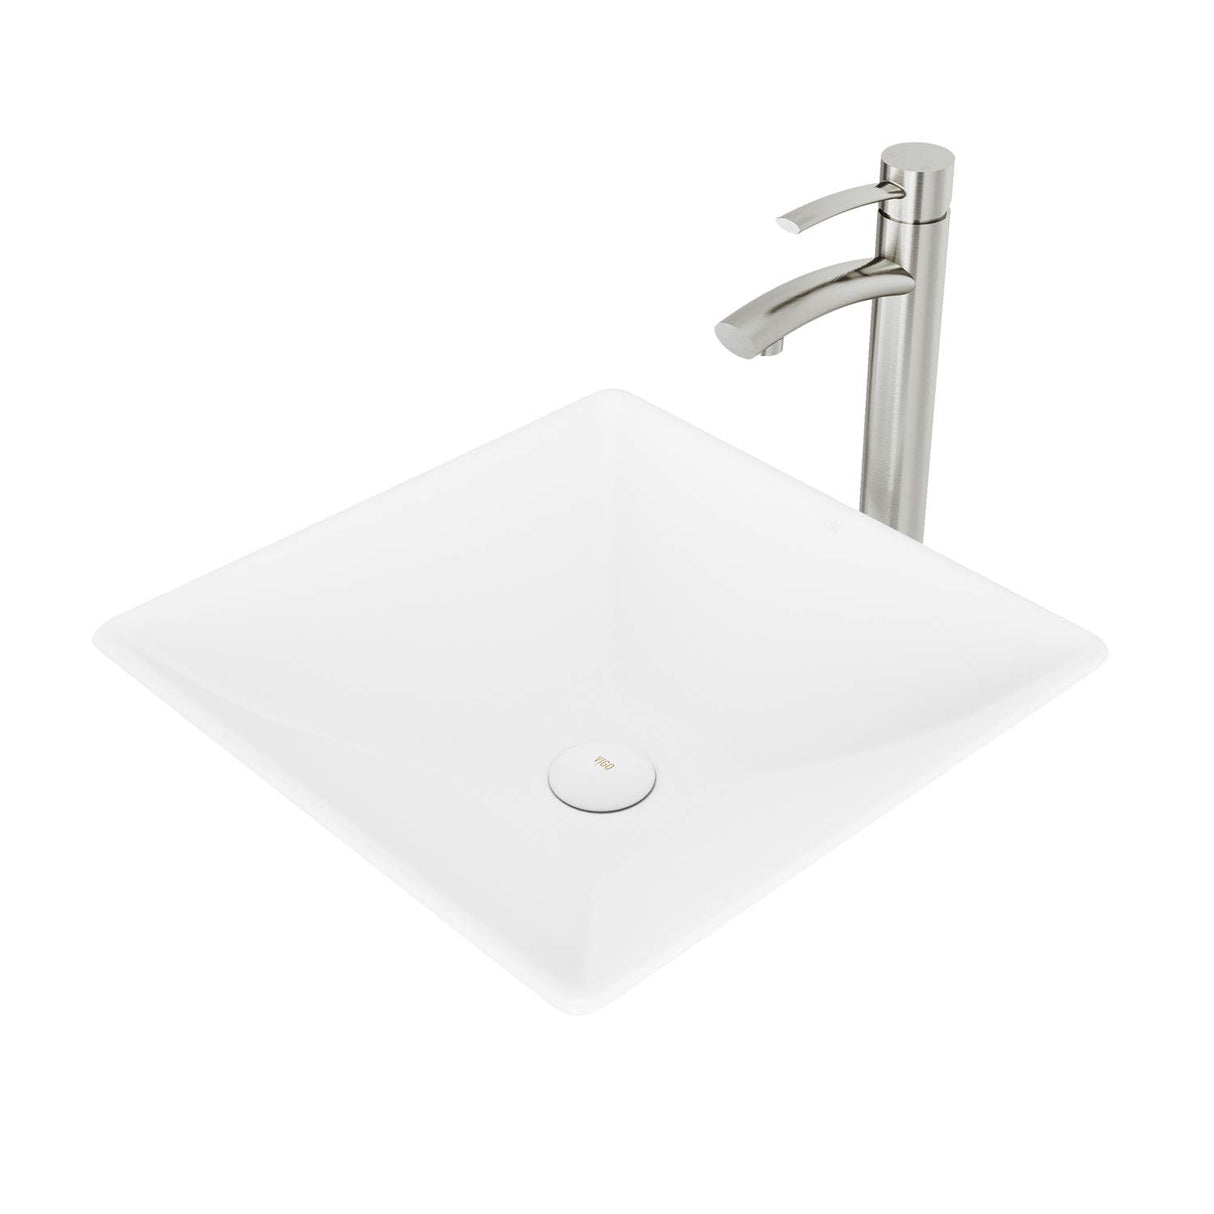 VIGO VGT1087MW 16.0" L -16.0" W -12.5" H Handmade Countertop Matte Stone Square Vessel Bathroom Sink Set in Matte White Finish with Brushed Nickel Single-Handle Single Hole Faucet and Pop Up Drain